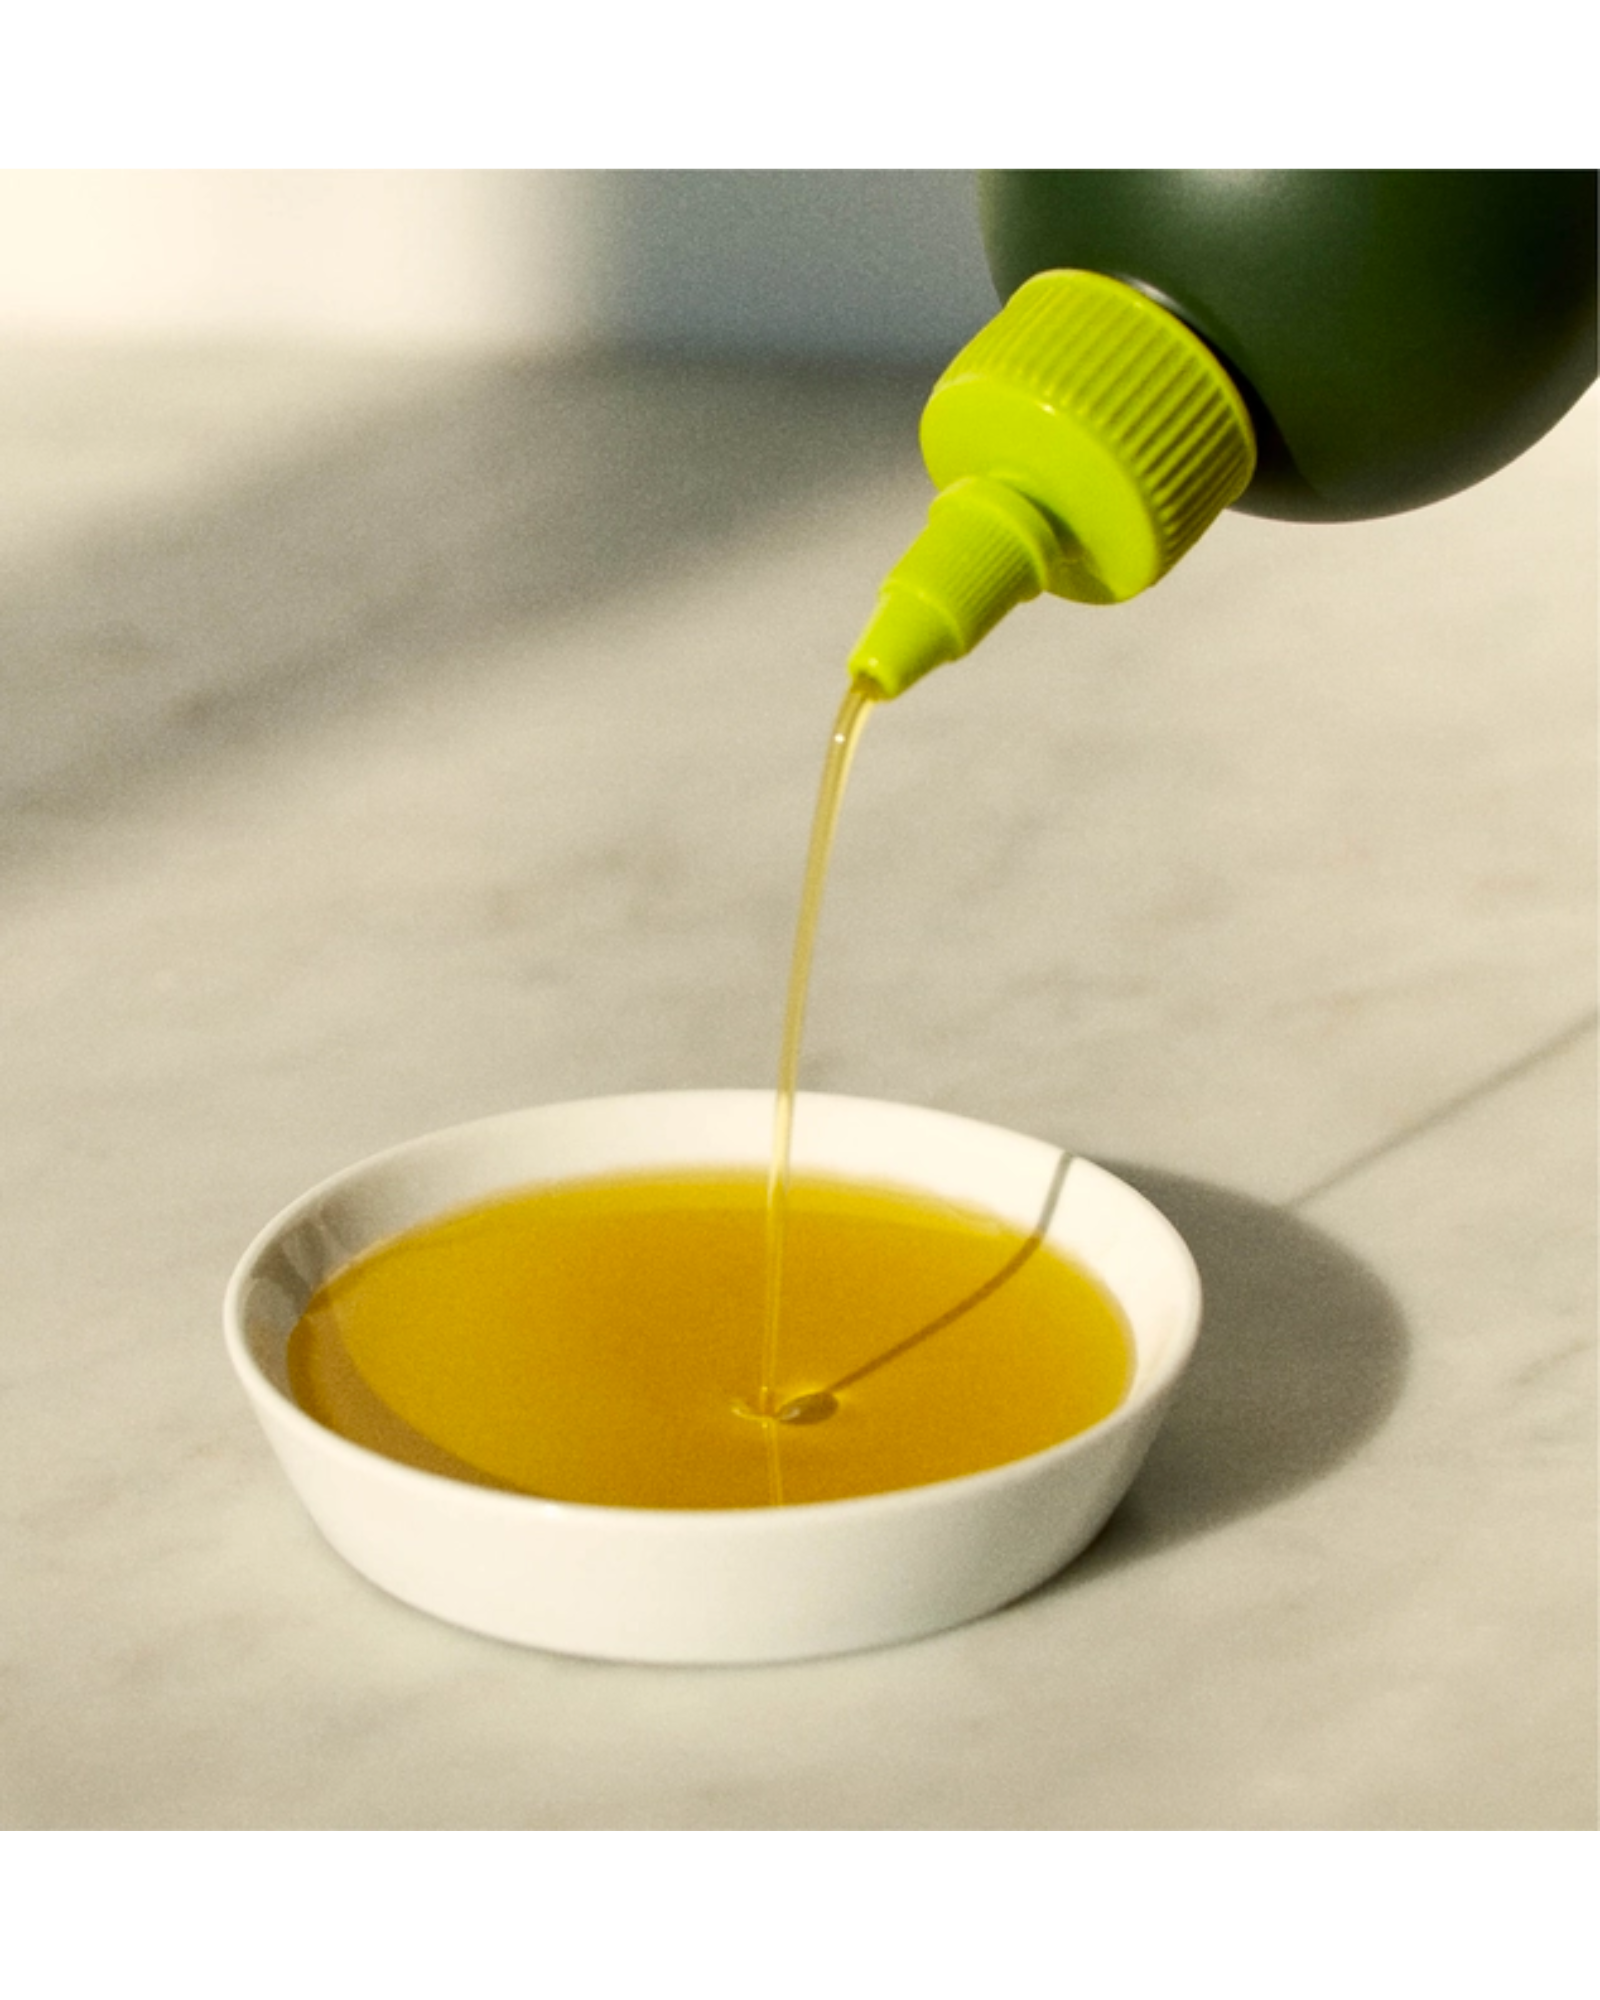 Sizzle | Extra Virgin Olive Oil